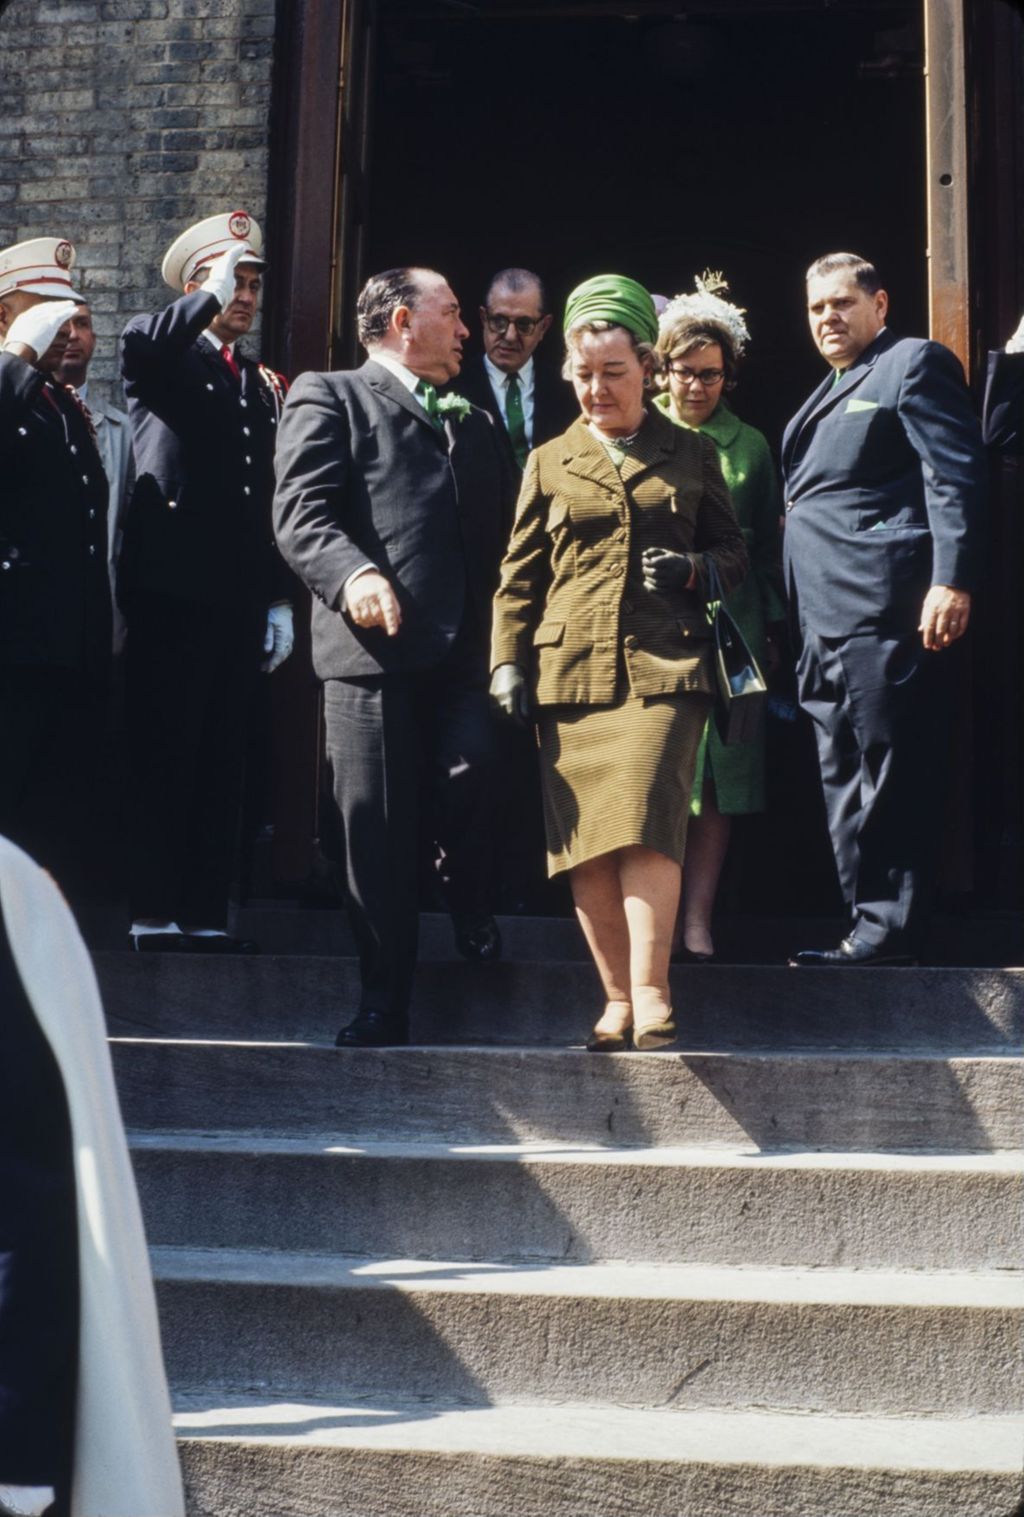 St. Patrick's Day in Chicago, 1966, Richard J. and Eleanor Daley leaving Old St. Patrick's Church